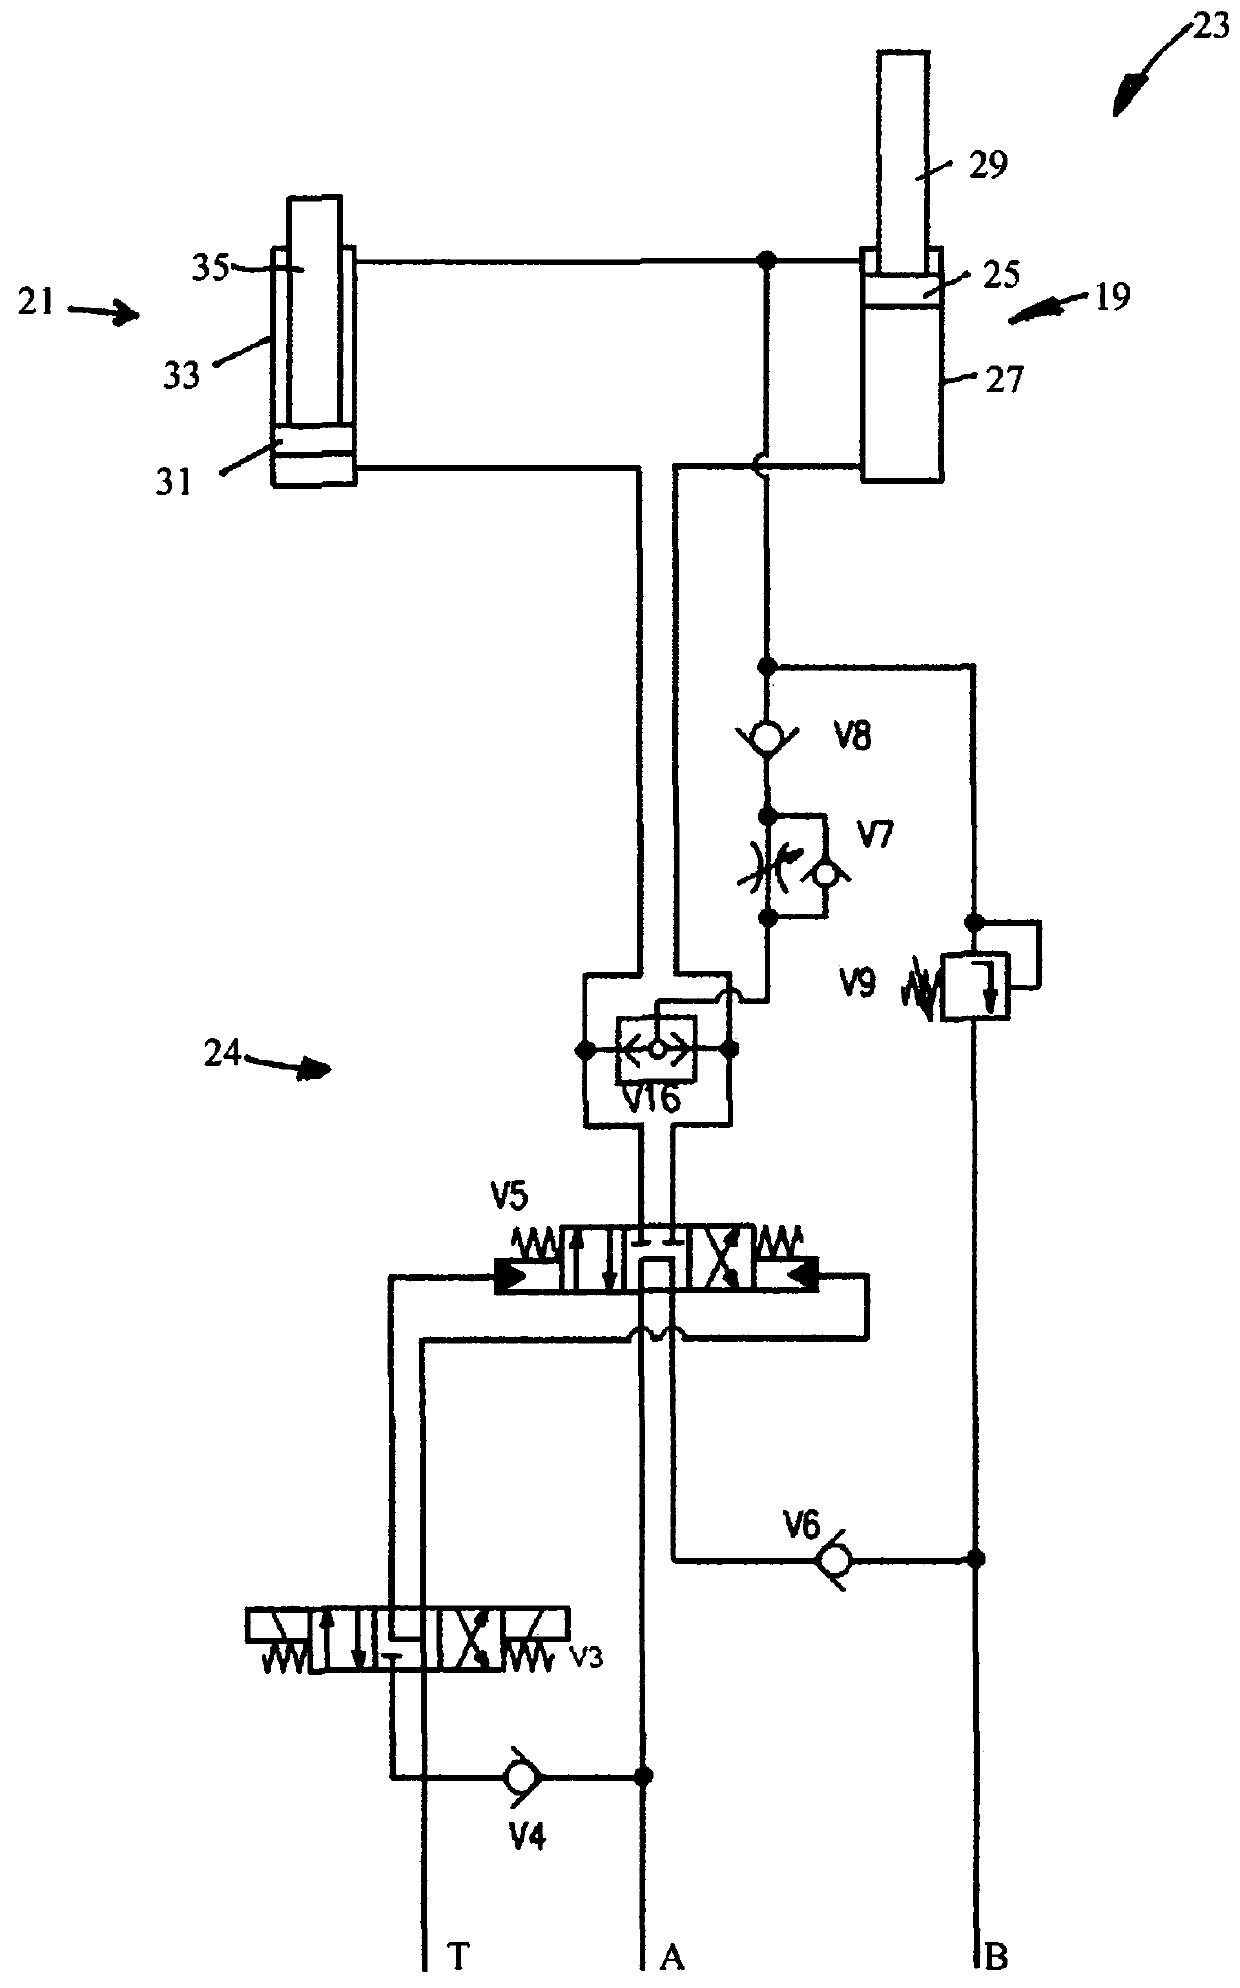 Method for conveying or transporting fluid or semi-fluid materials with a dual piston pump and the dual piston pump